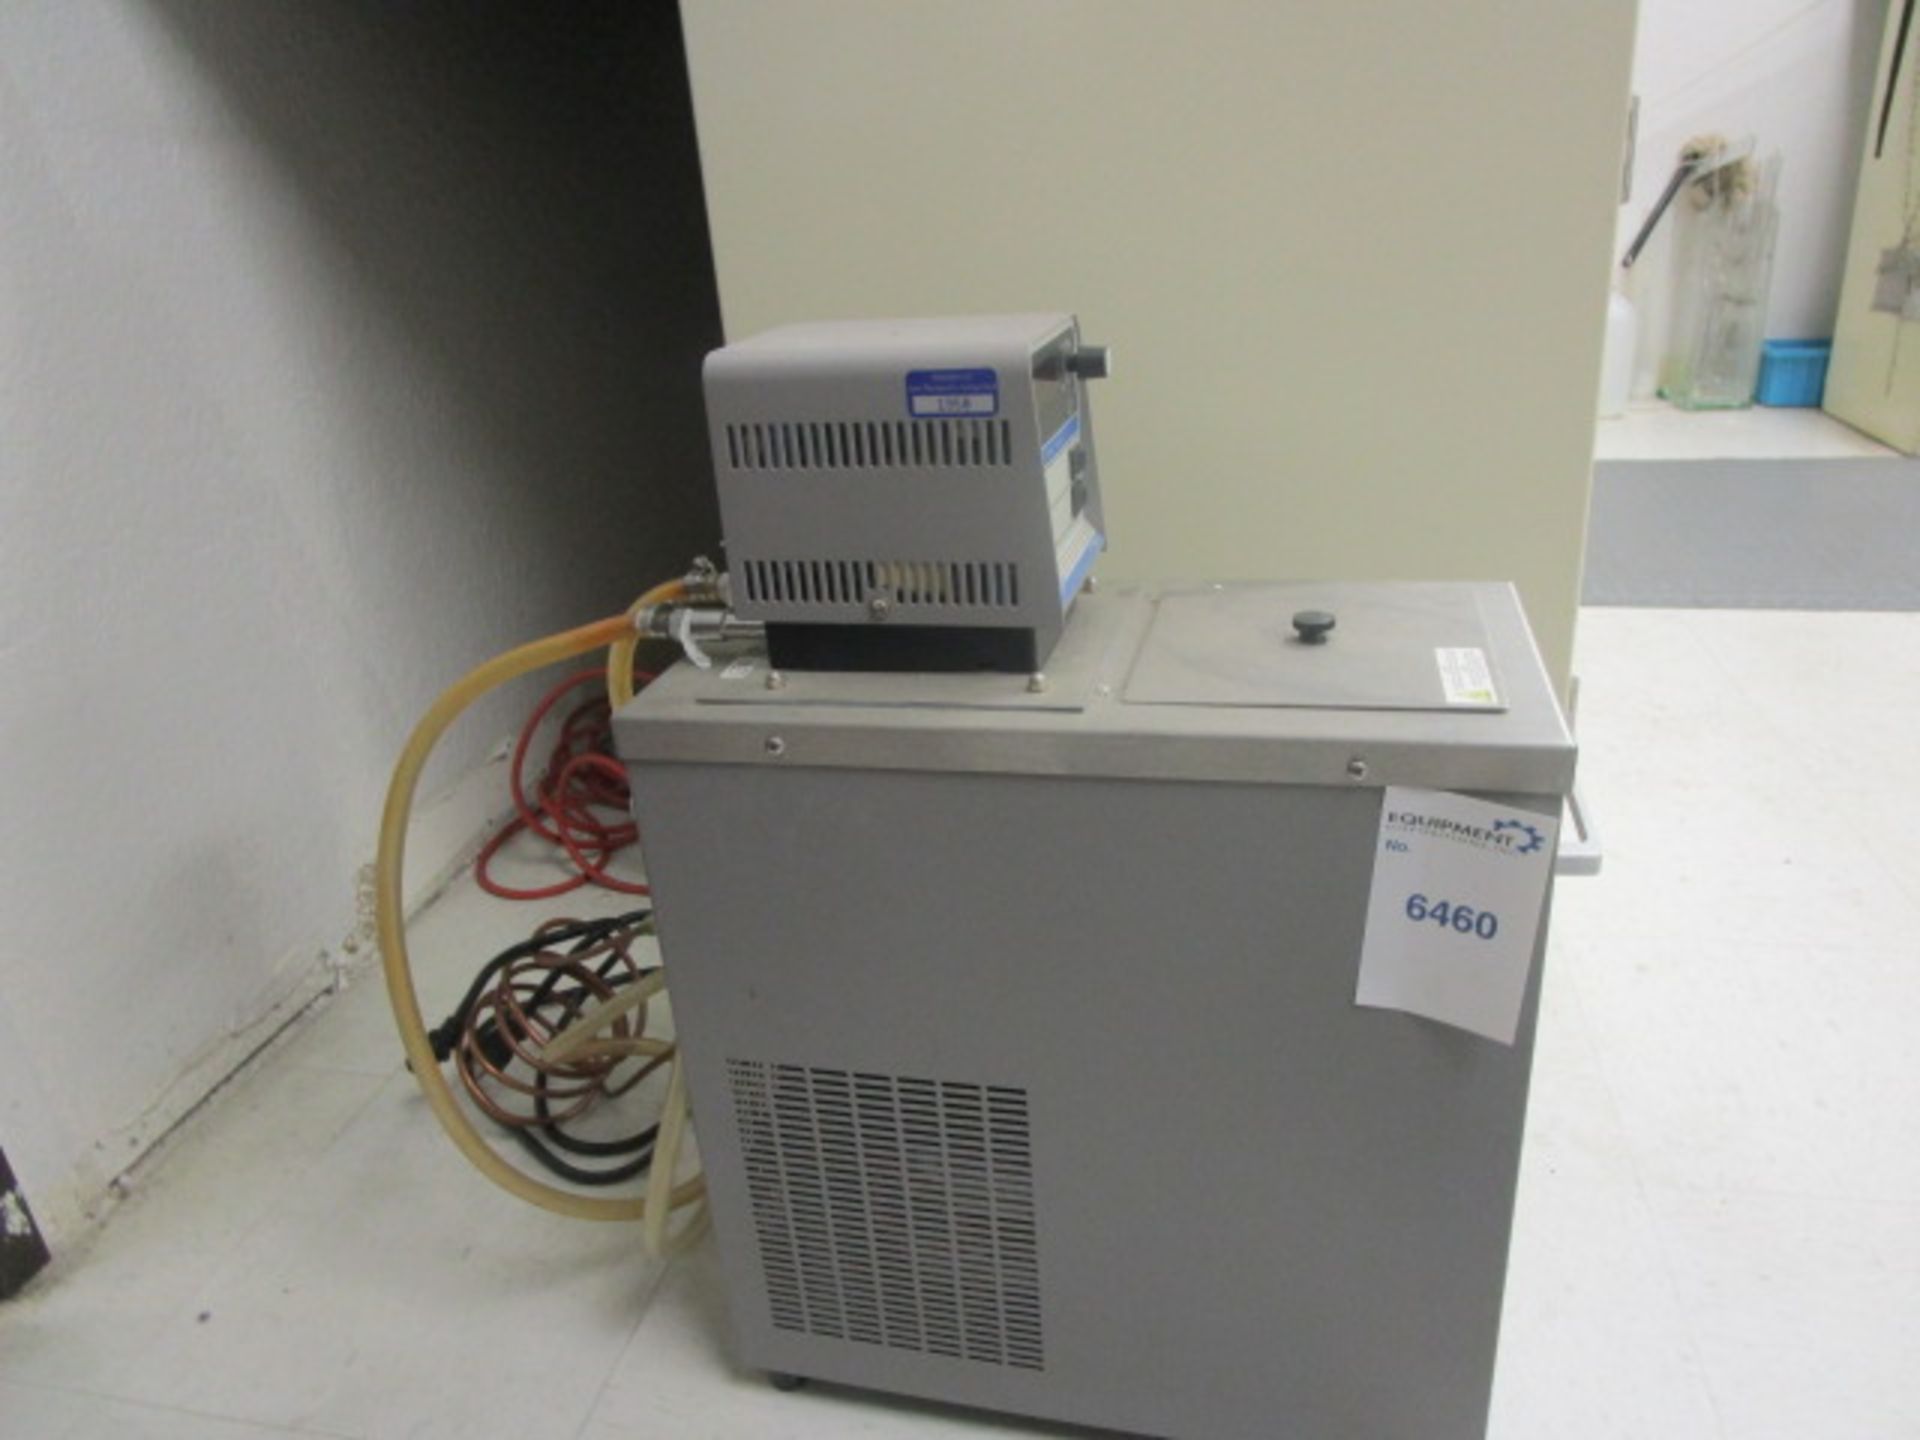 Polyscience 1160-A Thermo chiller VWR scientific products - Image 5 of 9